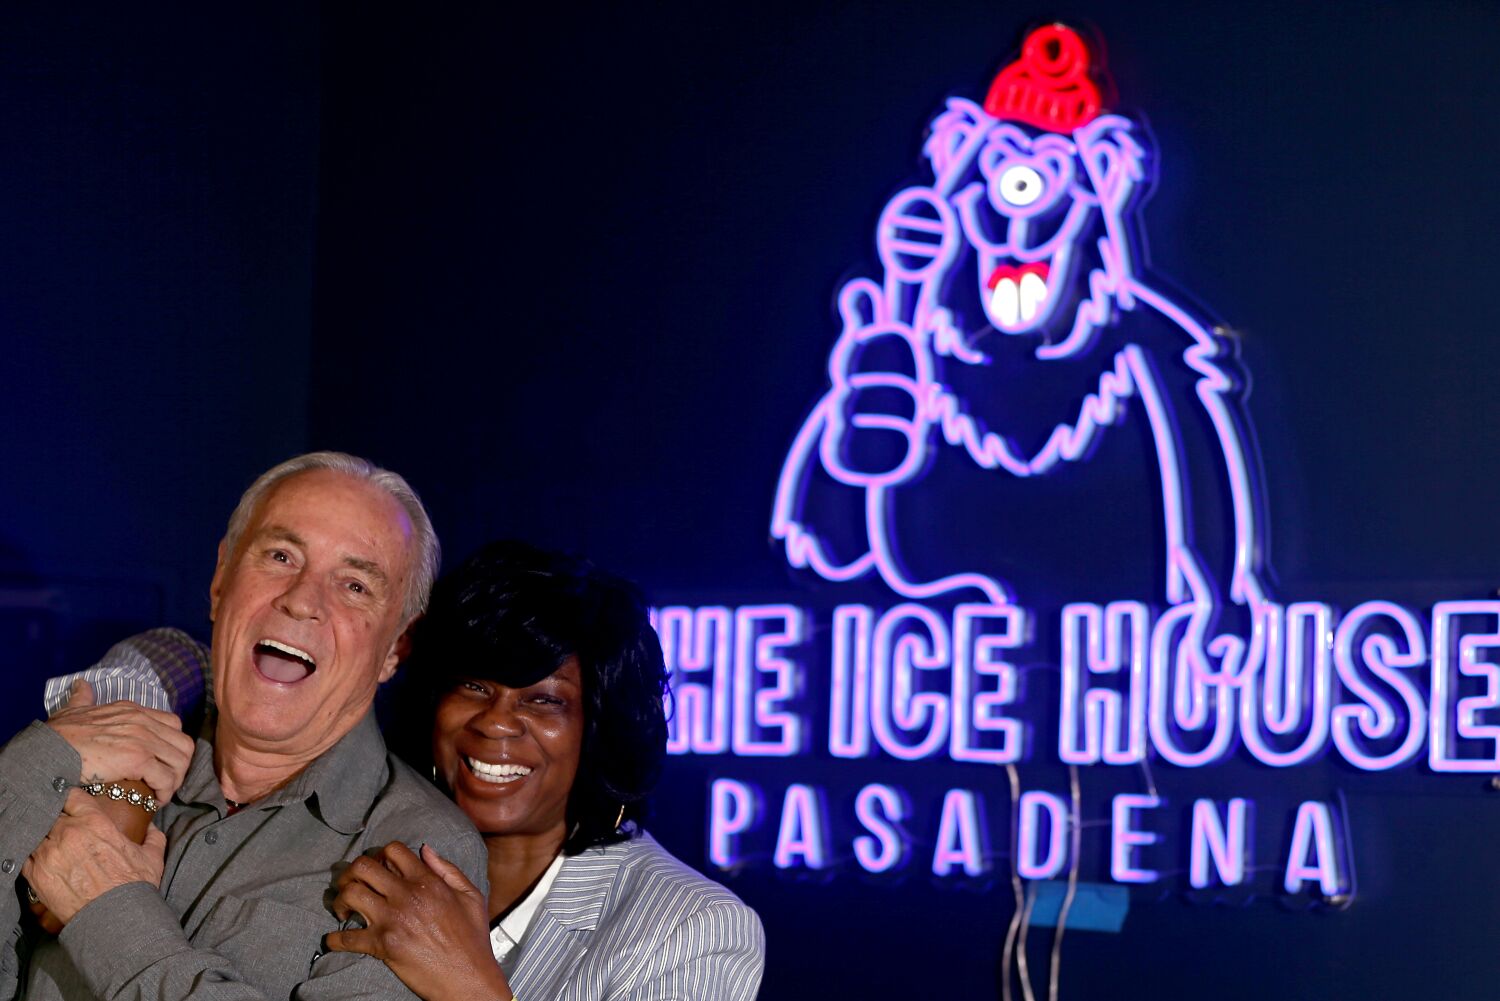 The Ice House reopens in Pasadena with laughs, lofty goals and Lakers magic